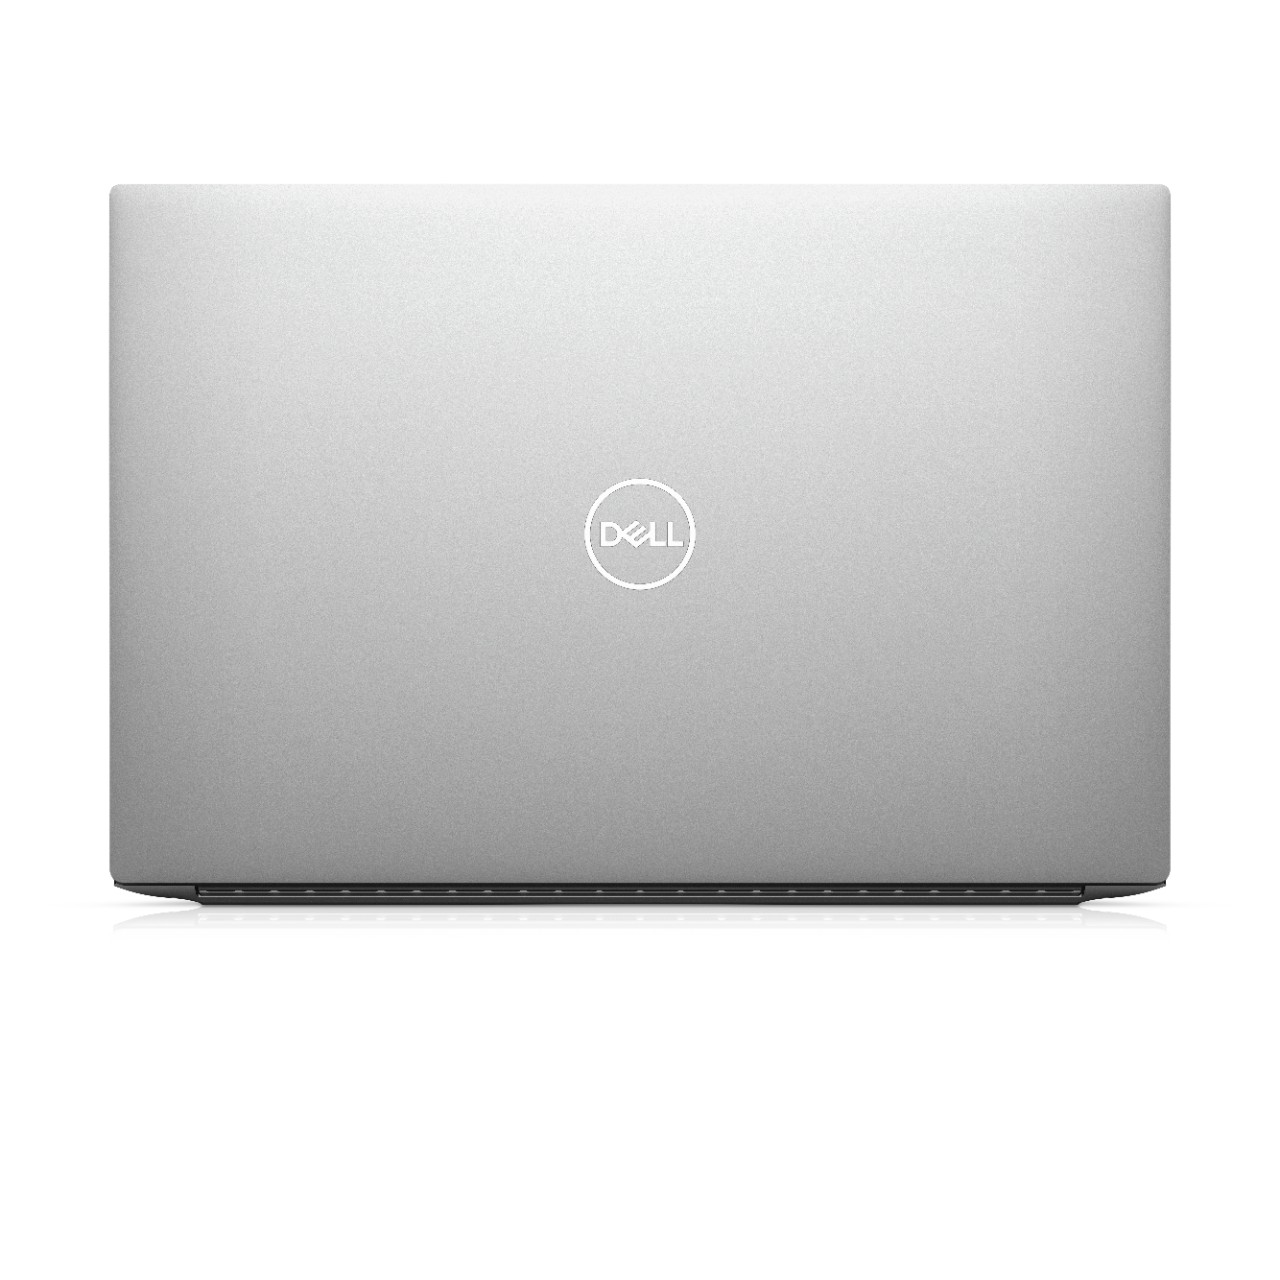 DELL XPS 15 (9500) Platinum Silver 15.6" InfinityEdge FHD+ AG IPS 500nit with Dolby Vision™ (Intel® Core™ i7-10750H, 16GB (2X8Gb) DDR4, 1TB M.2 PCIe NVMe SSD, NVIDIA GeForce GTX 1650Ti 4GB, WiFi6 2x2 + BT, TB3, 3Cell 56WHr, FPR, Backlit KB, Win10Pro, 2kg)